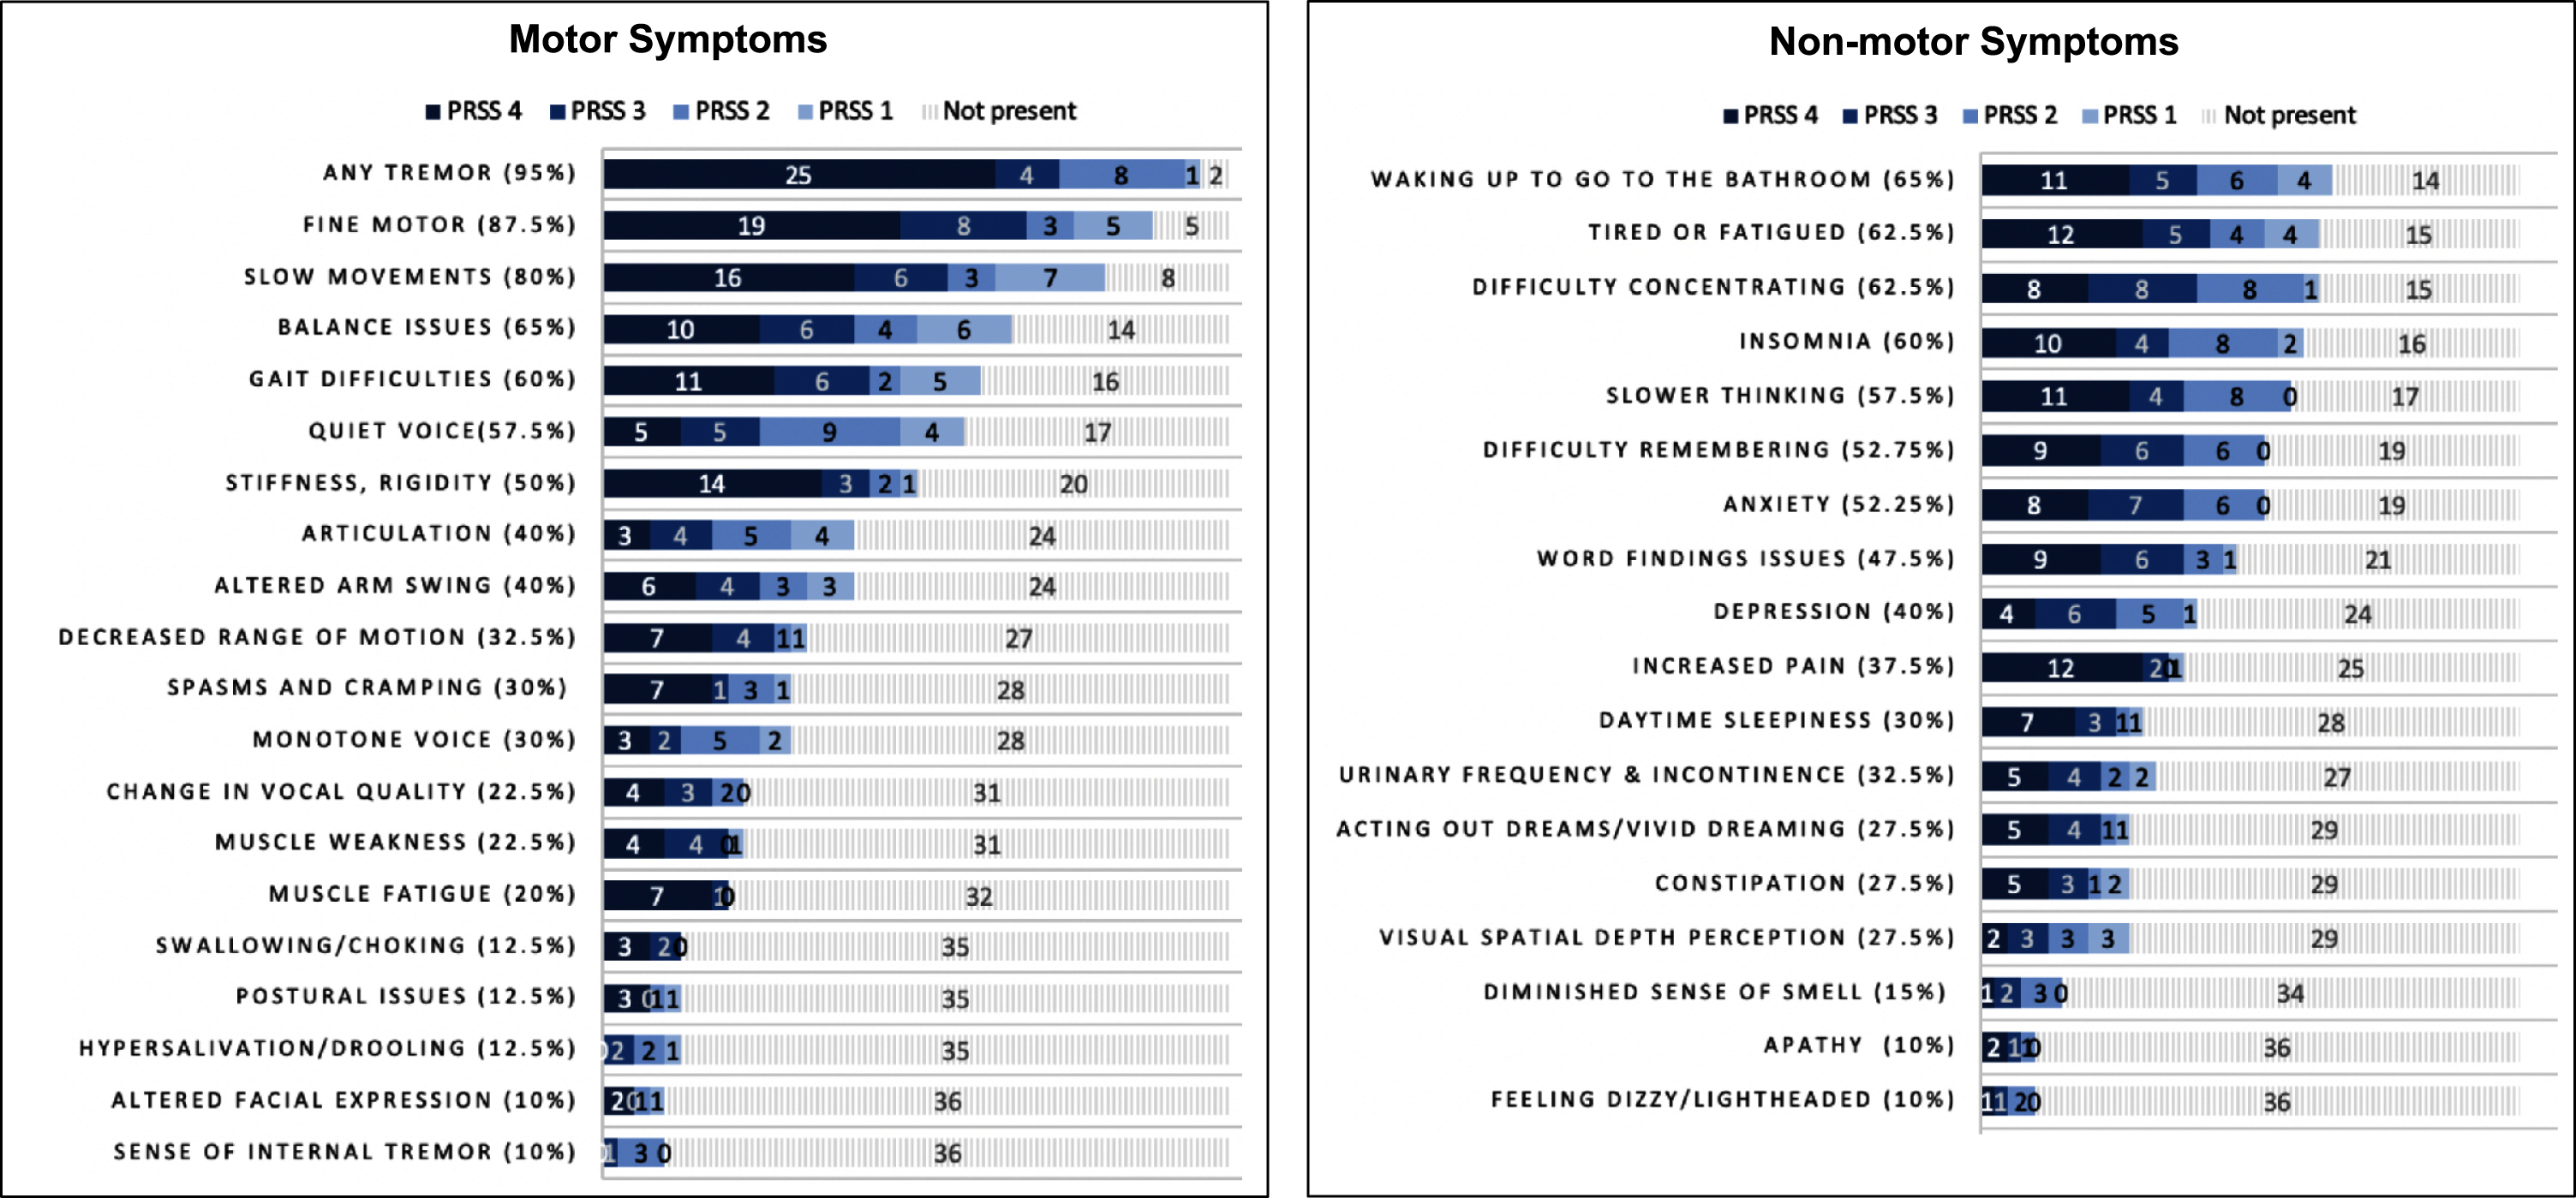 Patient reported motor and non-motor symptoms of early Parkinson’s disease as shown in symptom maps (N = 40). PRSS 1 = Patient Reported Symptom Score – Likert scale rating of bothersomeness ranging from most bothersome to not bothersome. PRSS 4 = Symptoms that are present and most bothersome; PRSS 3 = Symptoms that are present and somewhat bothersome symptoms; PRSS 2 = Symptoms that are present and less bothersome; PRSS 1 = Symptoms that are present but not bothersome; Not present, Symptom not experienced. PRSS Scores are absolute. Figure includes both primary and contributing symptoms for each PRSS level. Percentage (%) represents the total percent of participants who experience the symptoms (encompassing 1–4). Tremor subcategories included: Hand tremor (85%) Leg/foot tremor (42.5%; Face/neck/Jaw tremor 12.5%). The following symptoms were reported by < 10% sample and are not represented in the graphs: dry mouth, diminished sensation, temperature dysregulation, sexual dysfunction, tearing of eyes, loss of appetite, double vision, right/left confusion, hemi-spatial neglect. Dyskinesias were not reported.